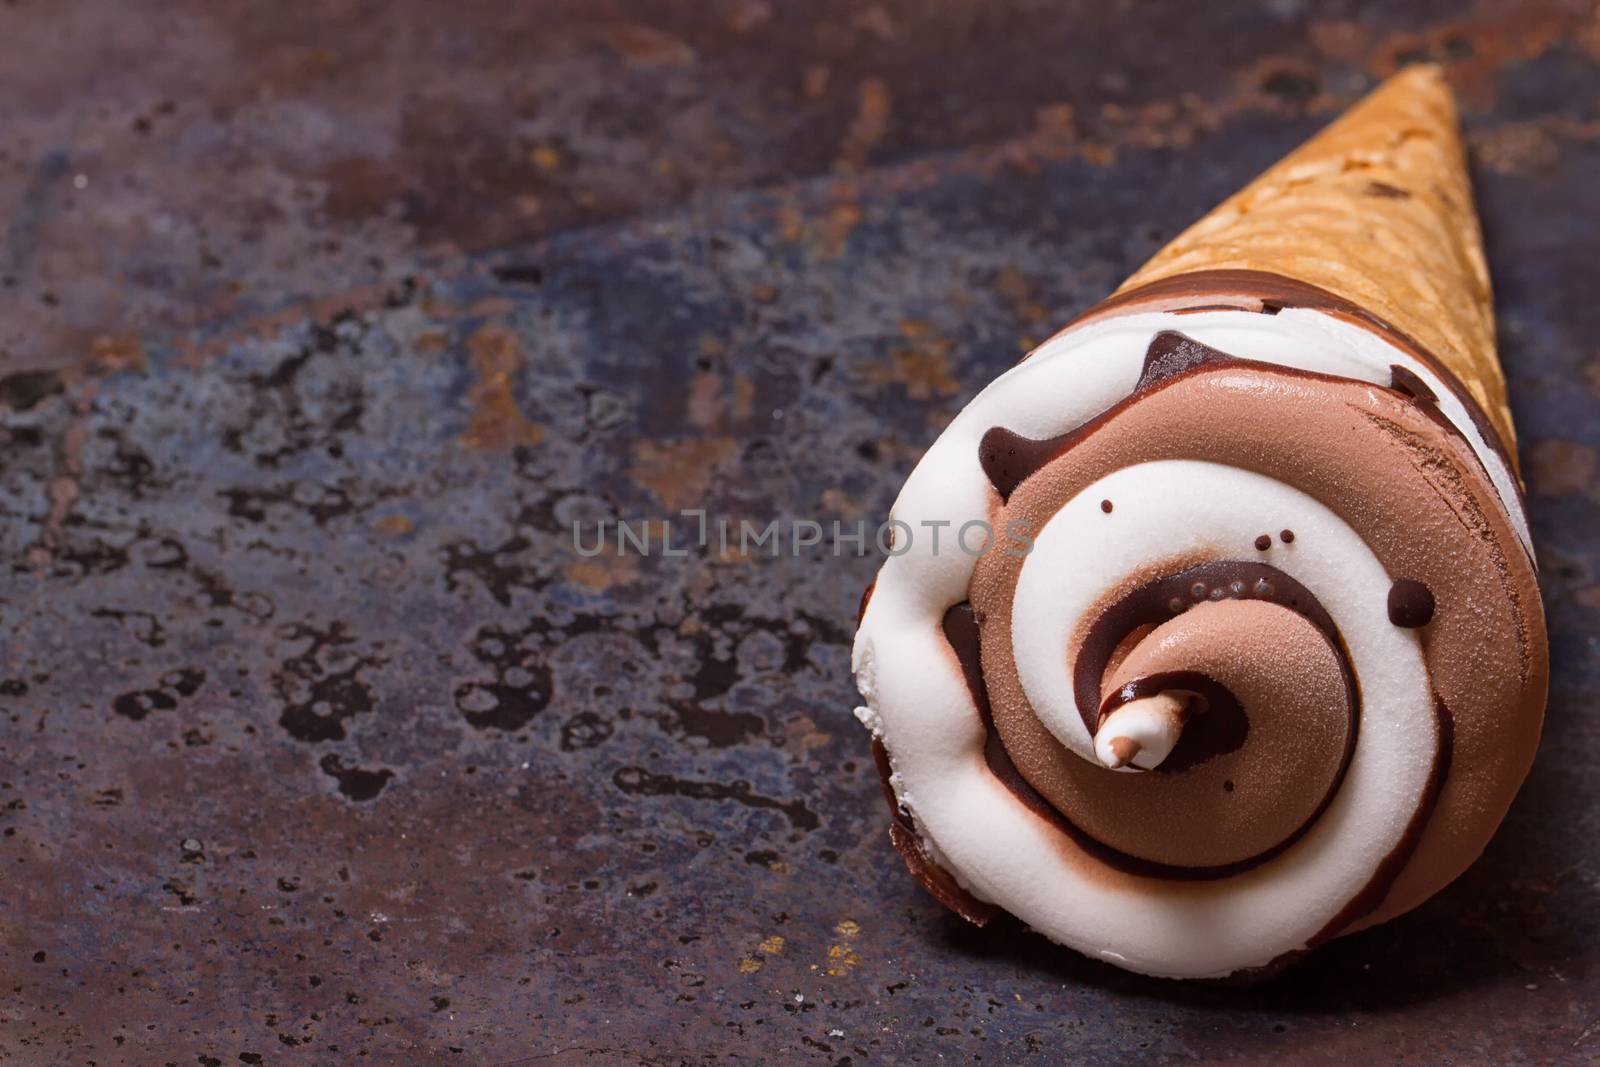 Vanilla ice cream cone with chocolate on an old grunge background